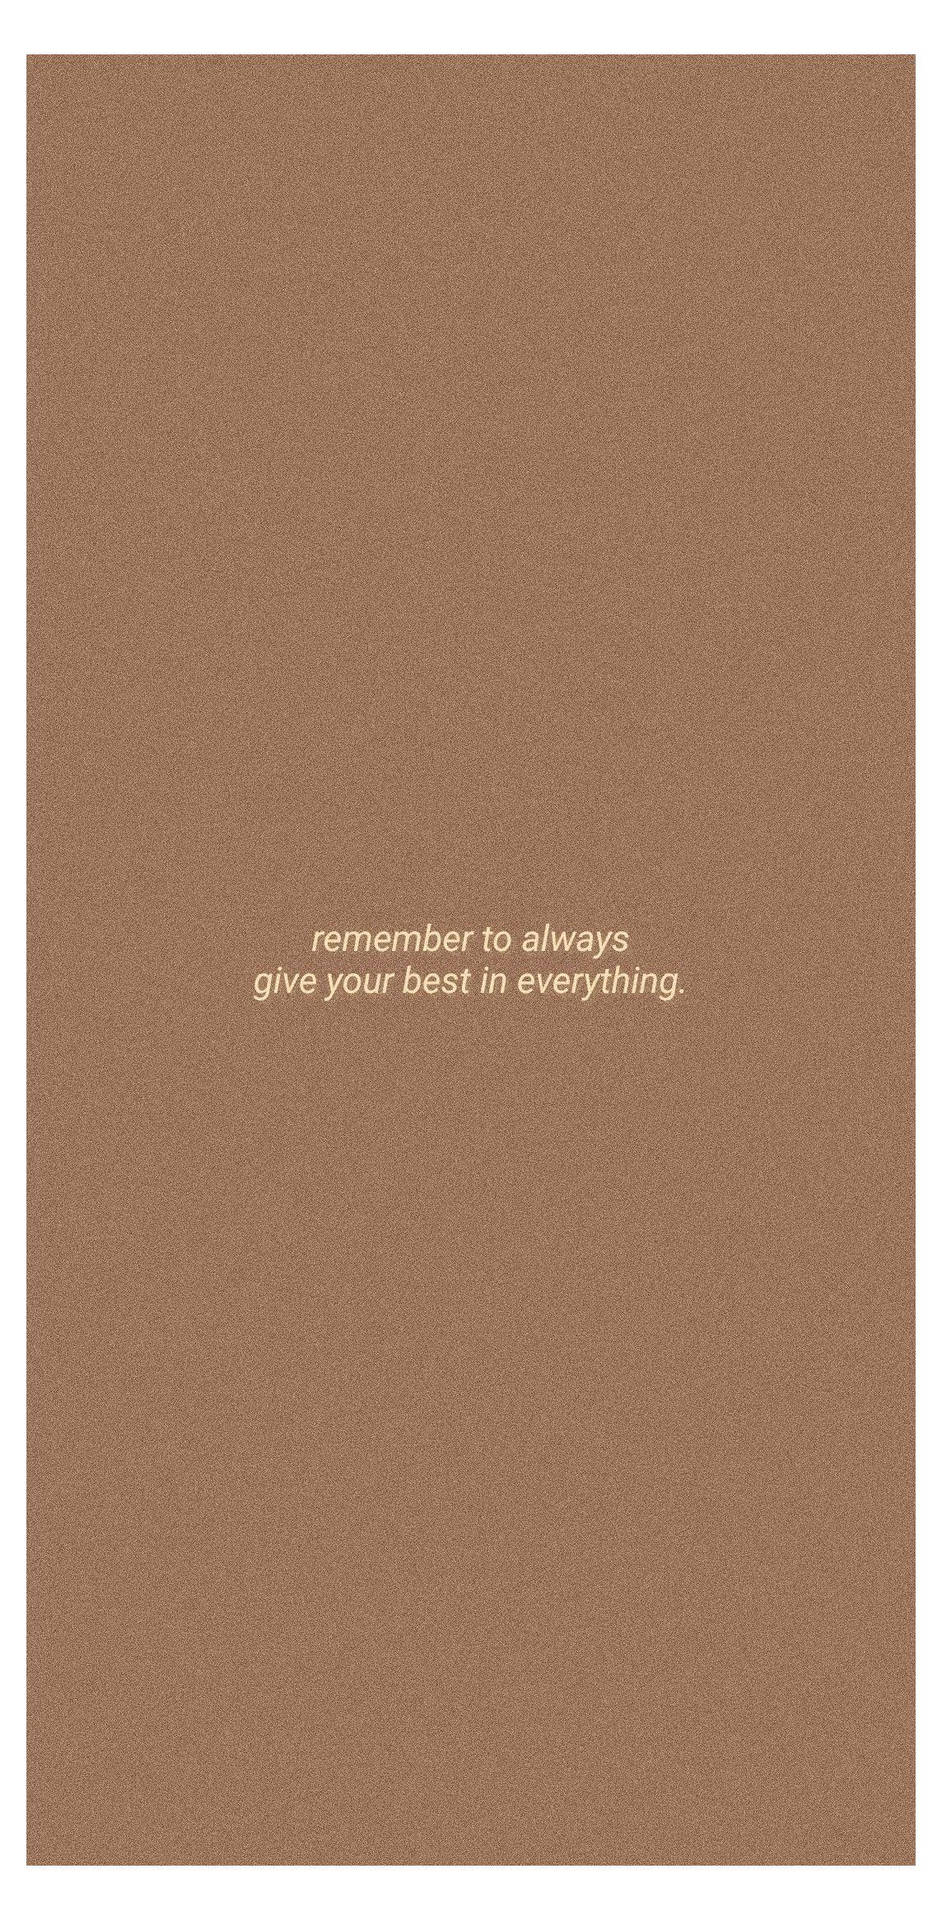 Saying On Beige Brown Aesthetic Background